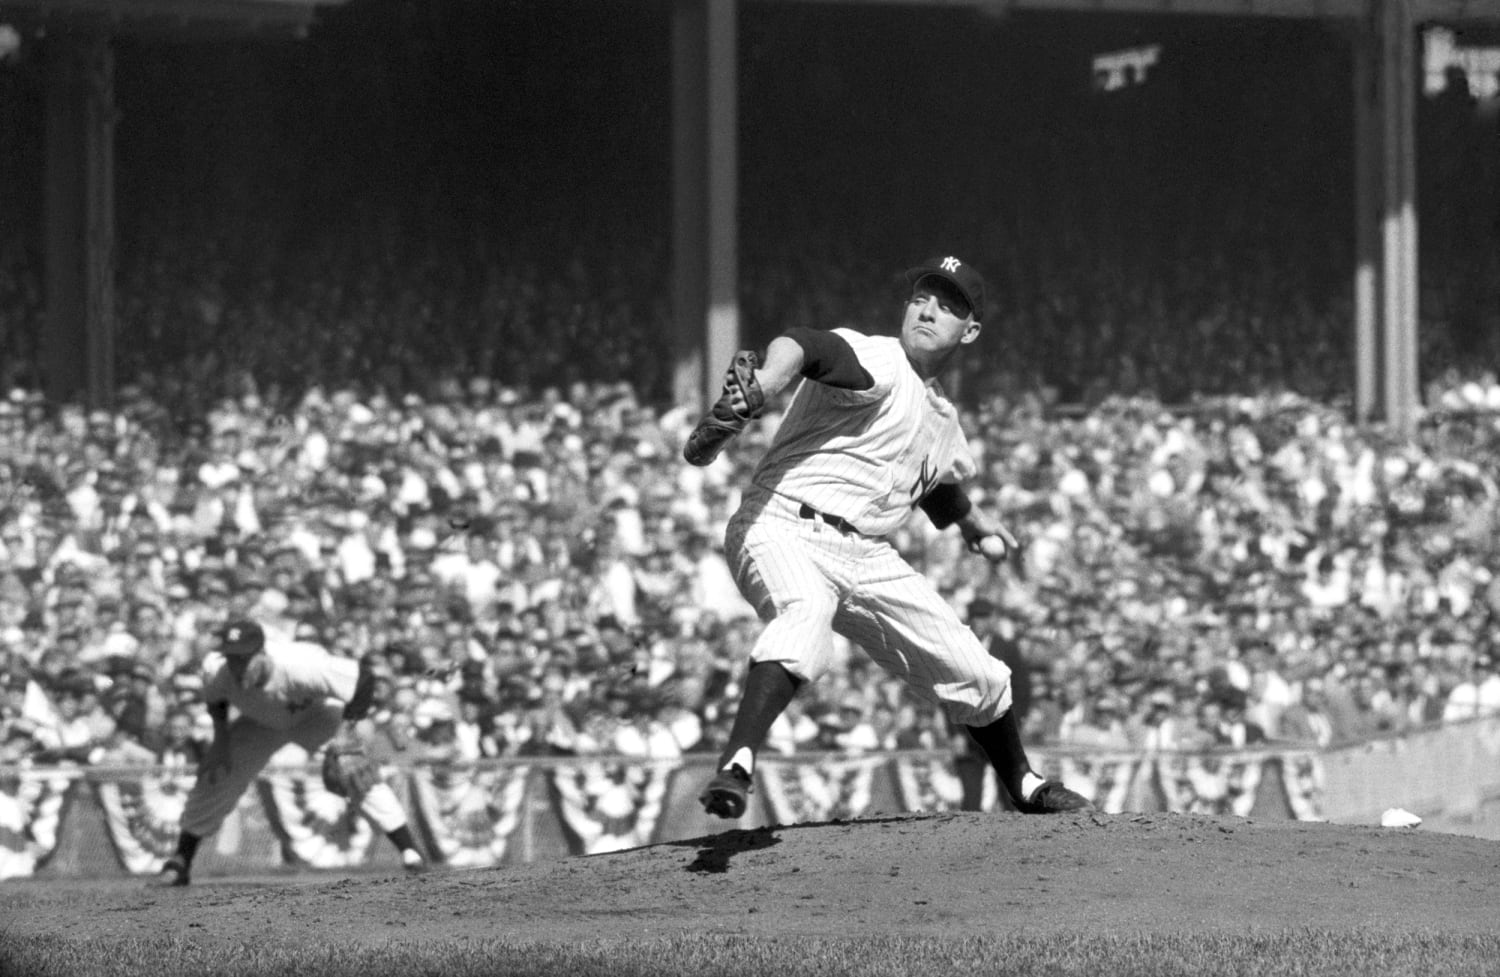 Whitey Ford, pitcher who epitomized mighty Yankees, dies at 91